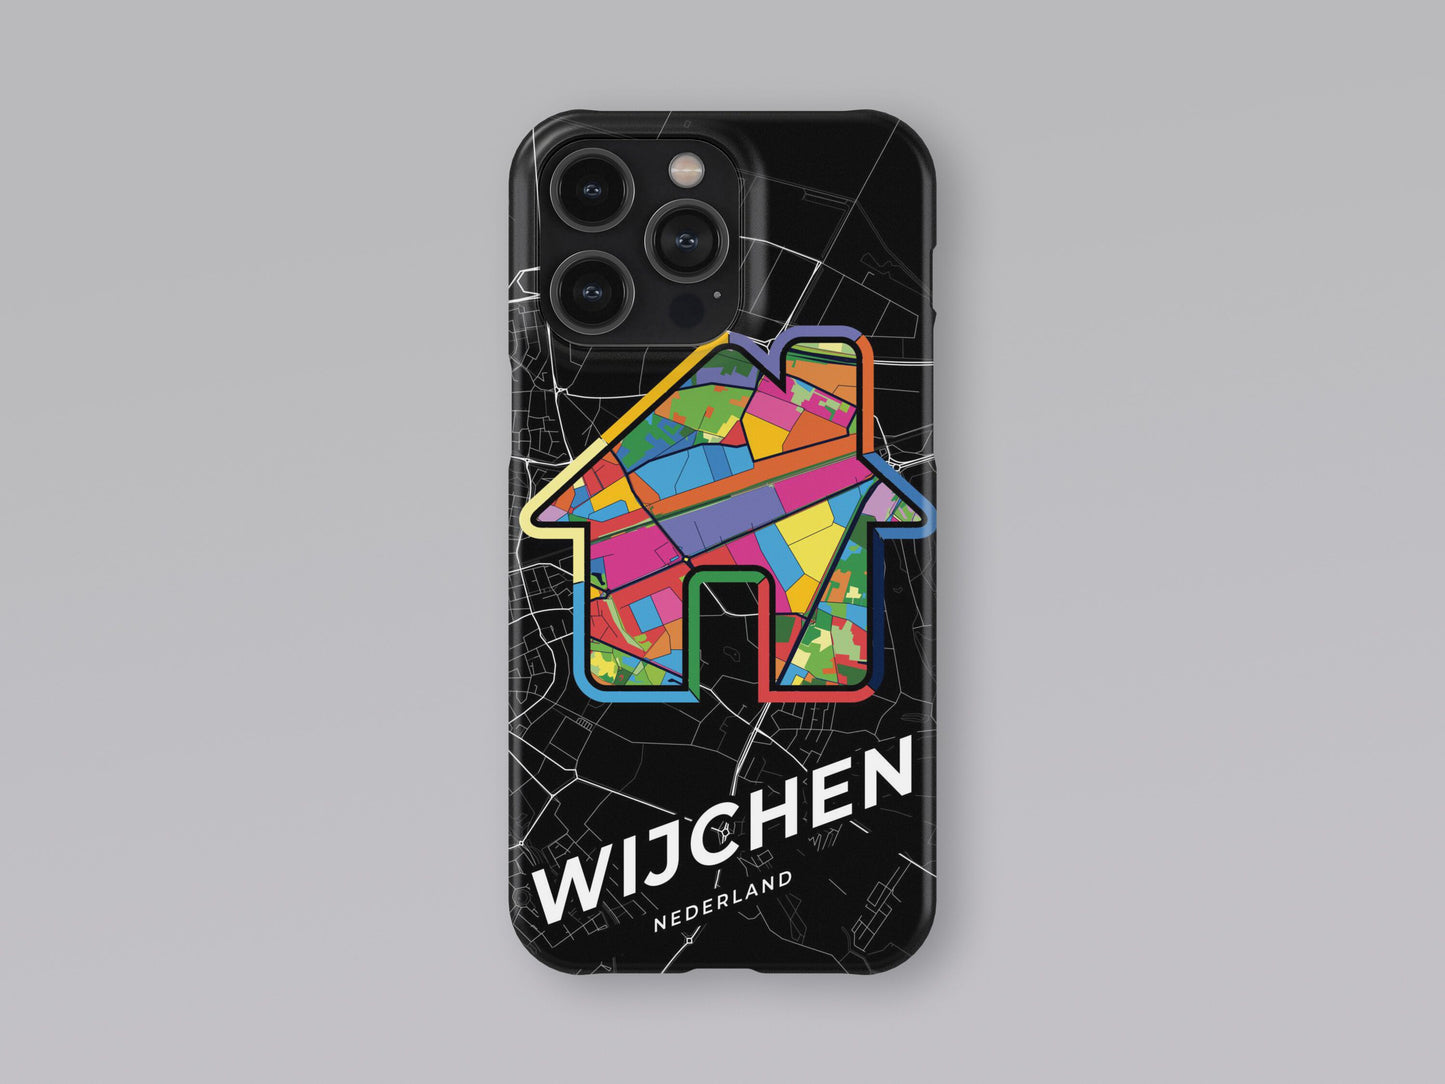 Wijchen Netherlands slim phone case with colorful icon 3